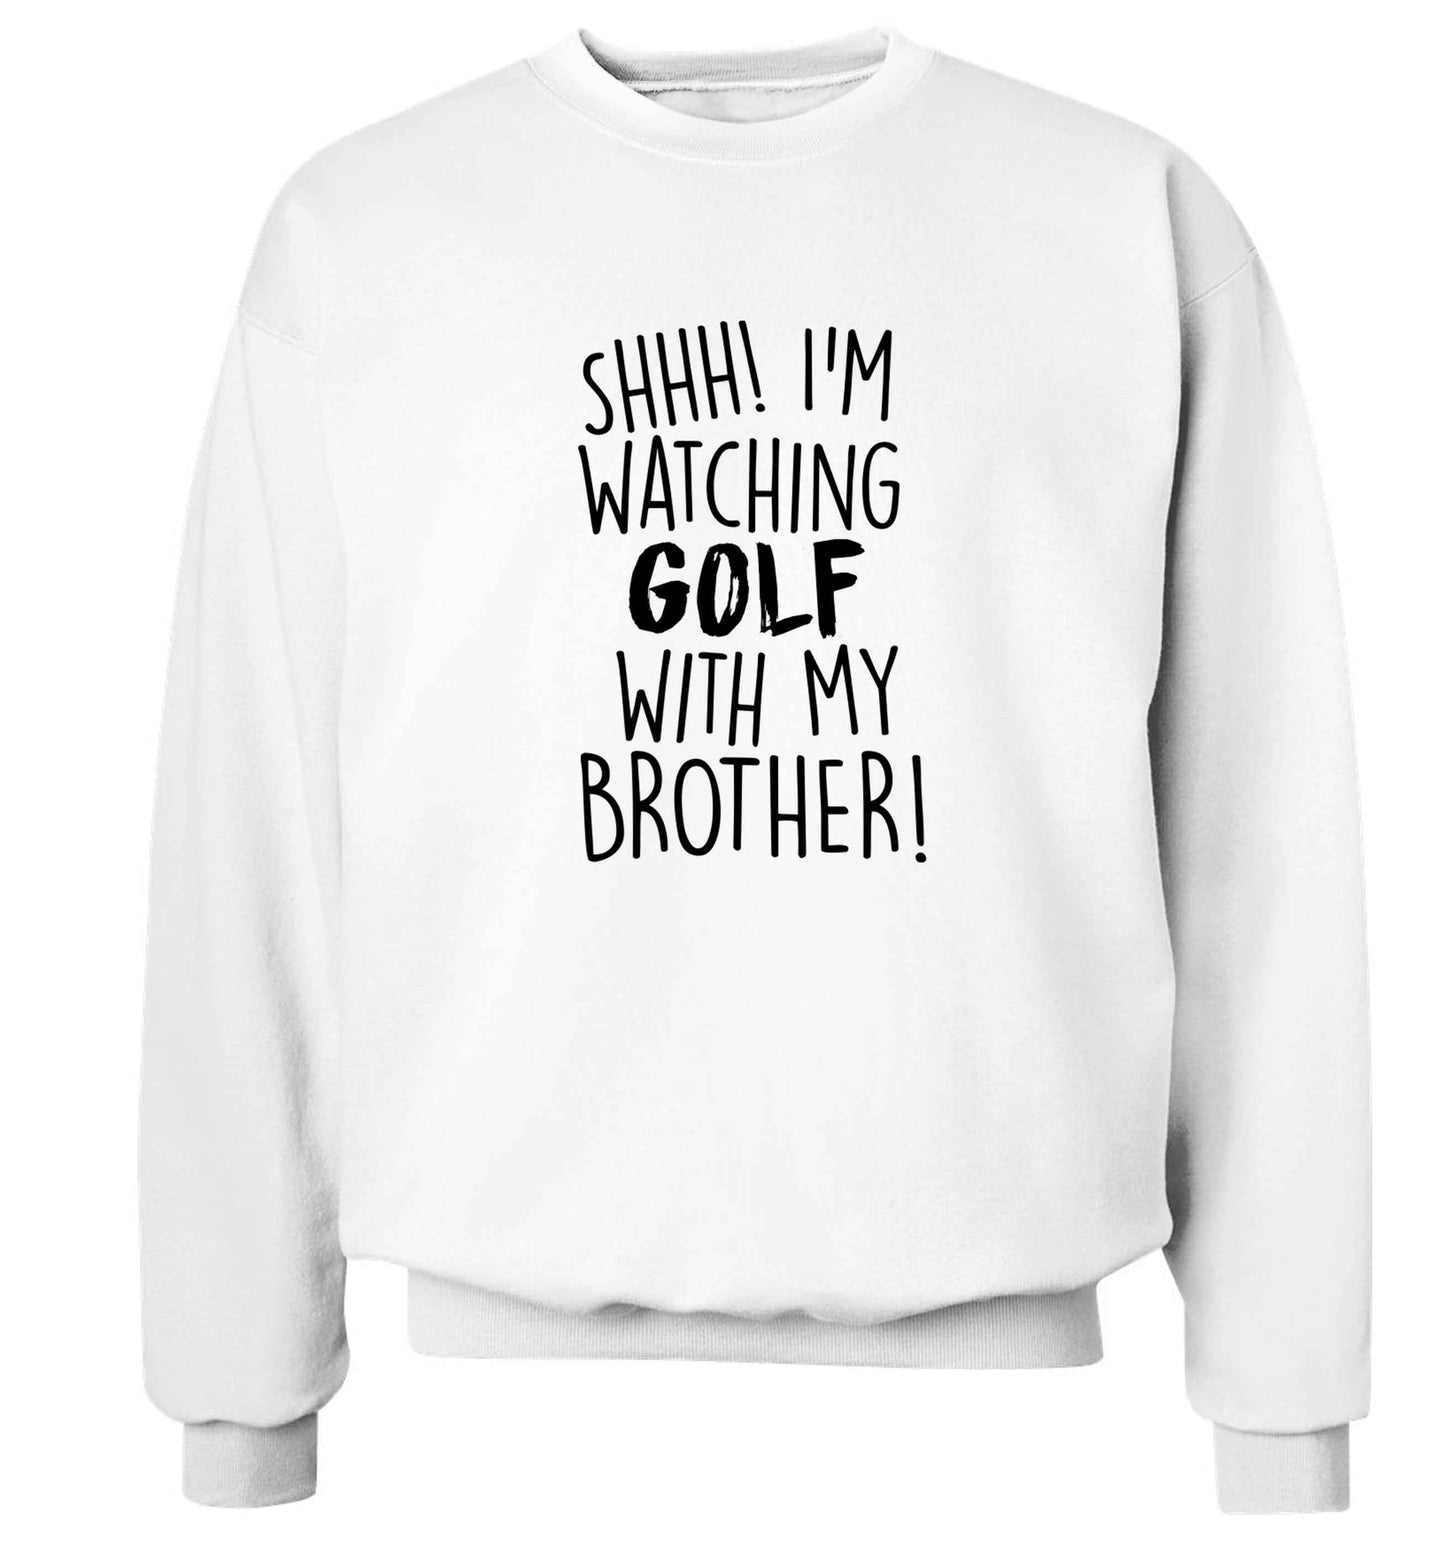 Shh I'm watching golf with my brother Adult's unisex white Sweater 2XL